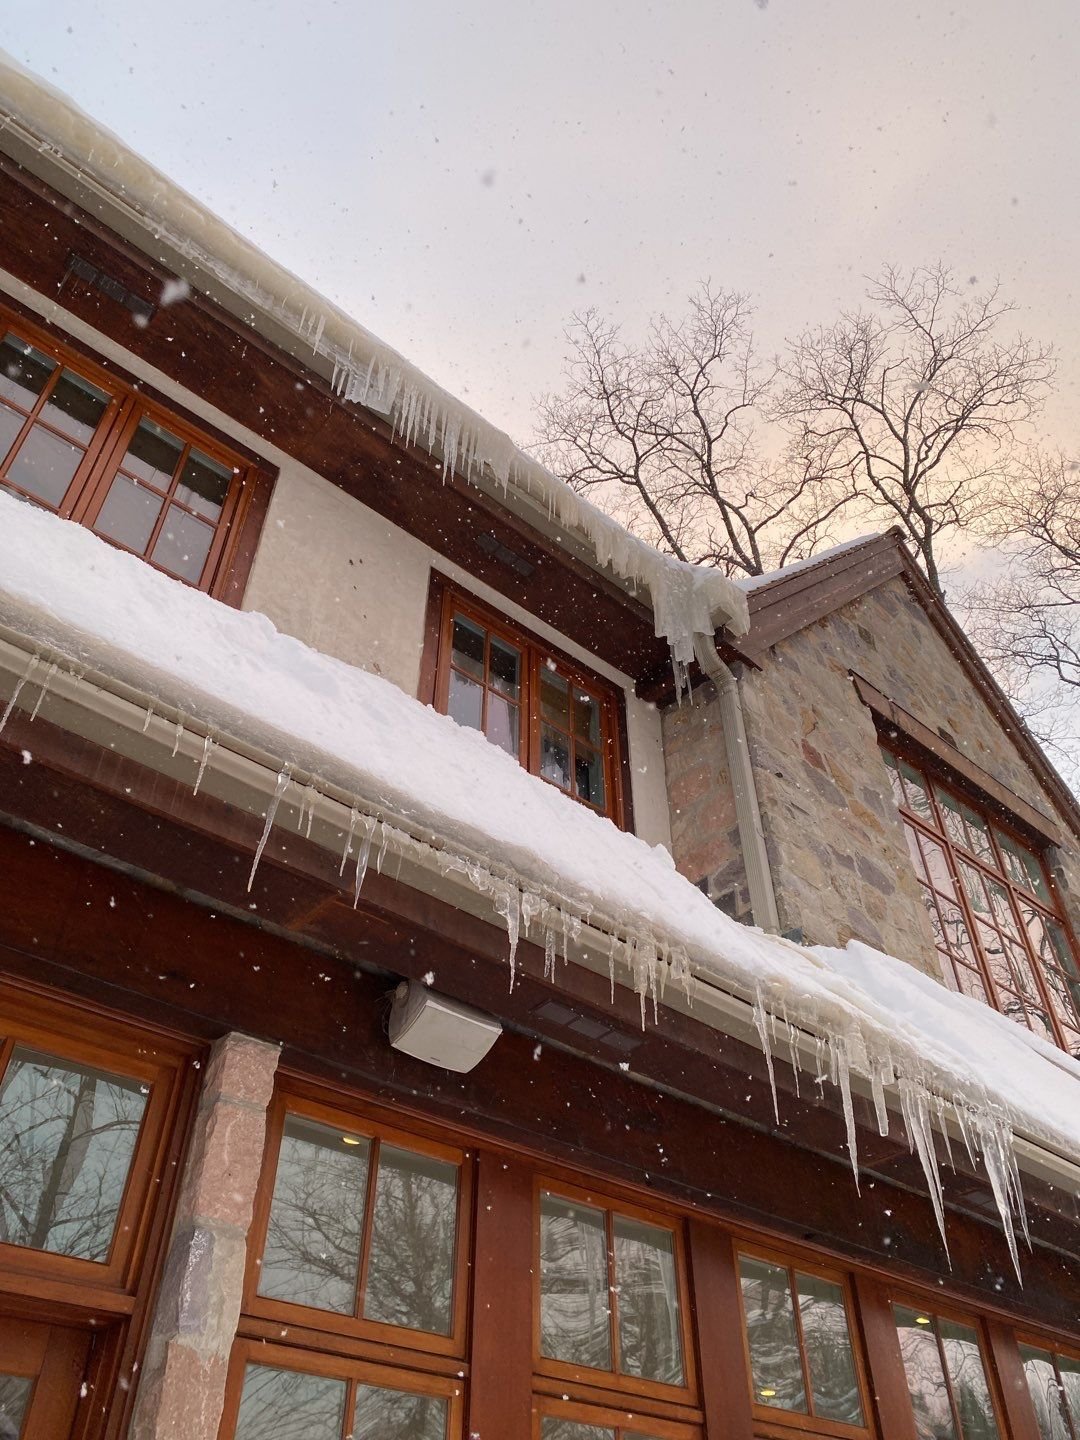 How to avoid ice dams on roofs?